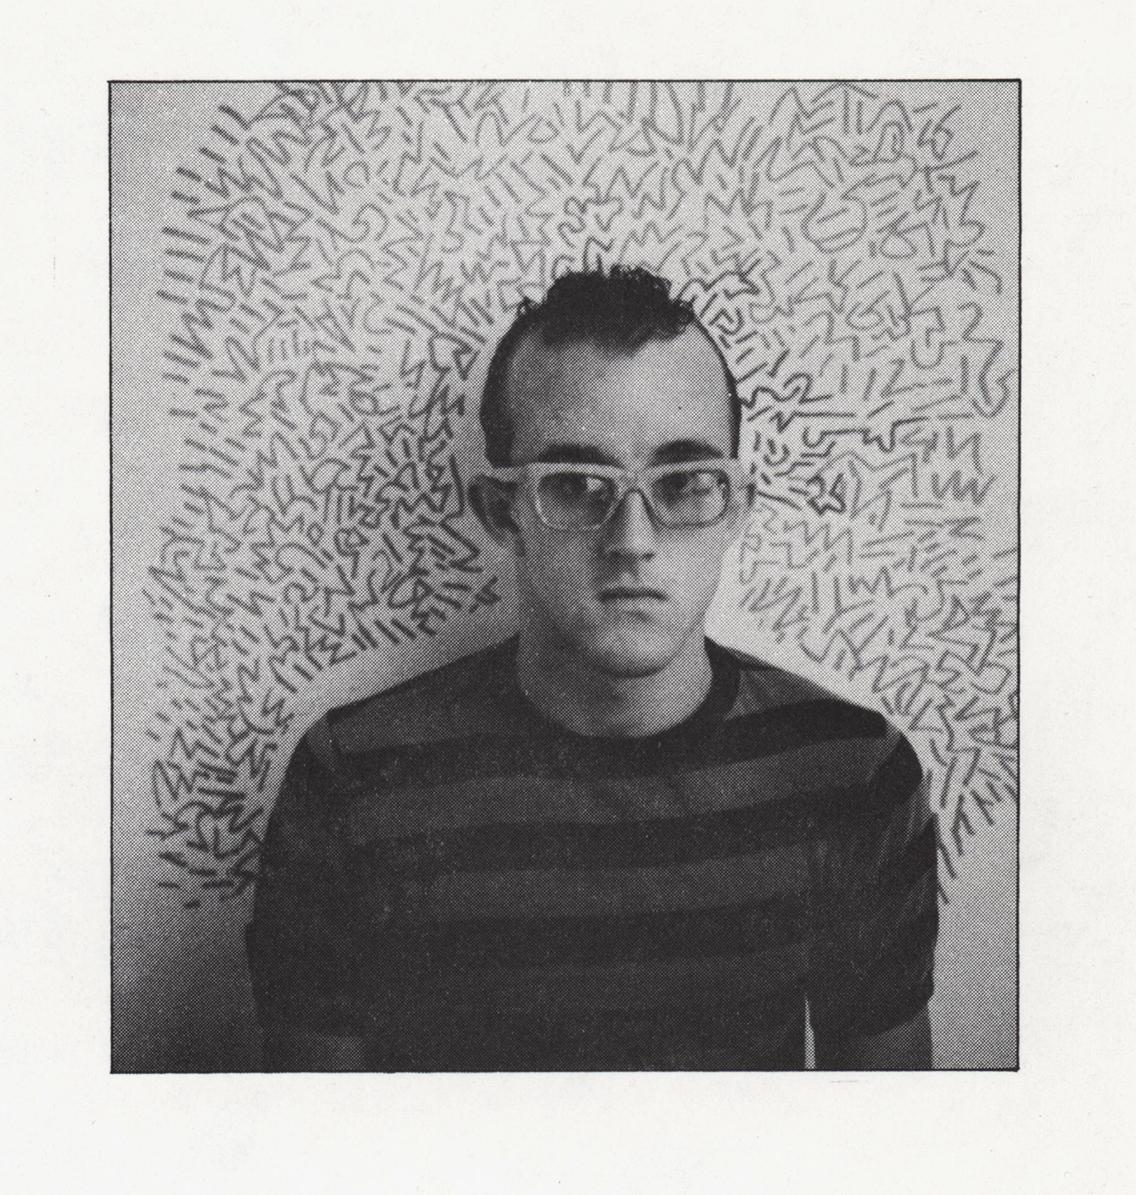 Keith Haring Tony Shafrazi gallery 1982 (Keith Haring resume) - Pop Art Print by (after) Keith Haring